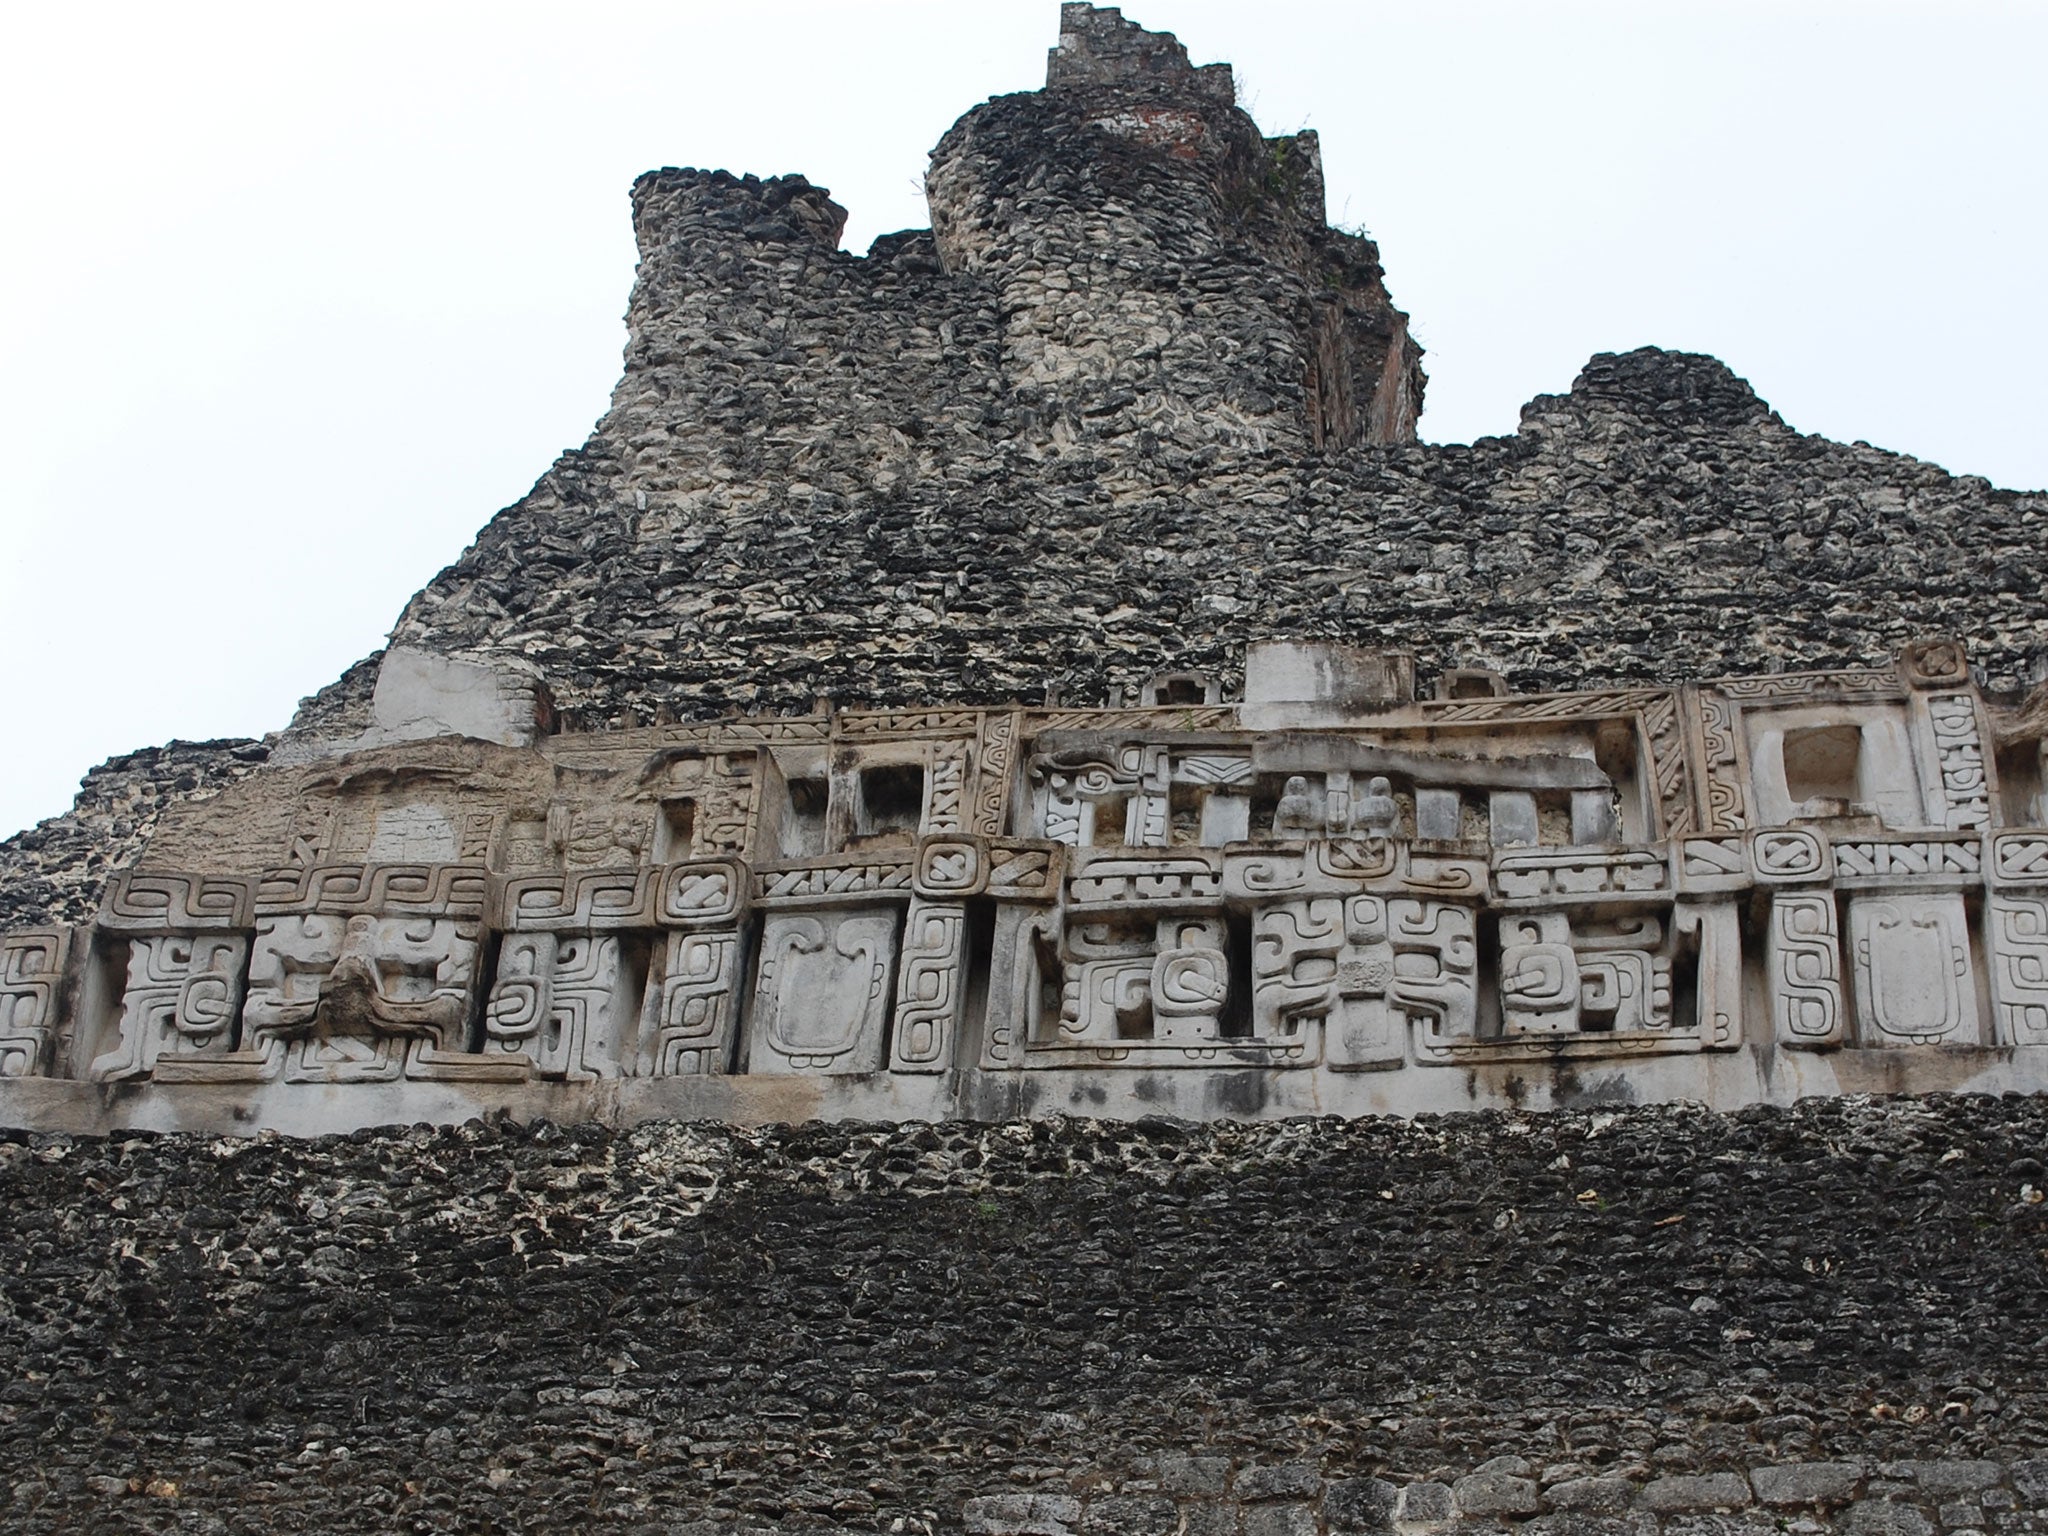 Carvings on a pyramid at Xunantunich, Belize. A royal tomb thought to belong to the ‘snake dynasty’ has been found in the ancient city